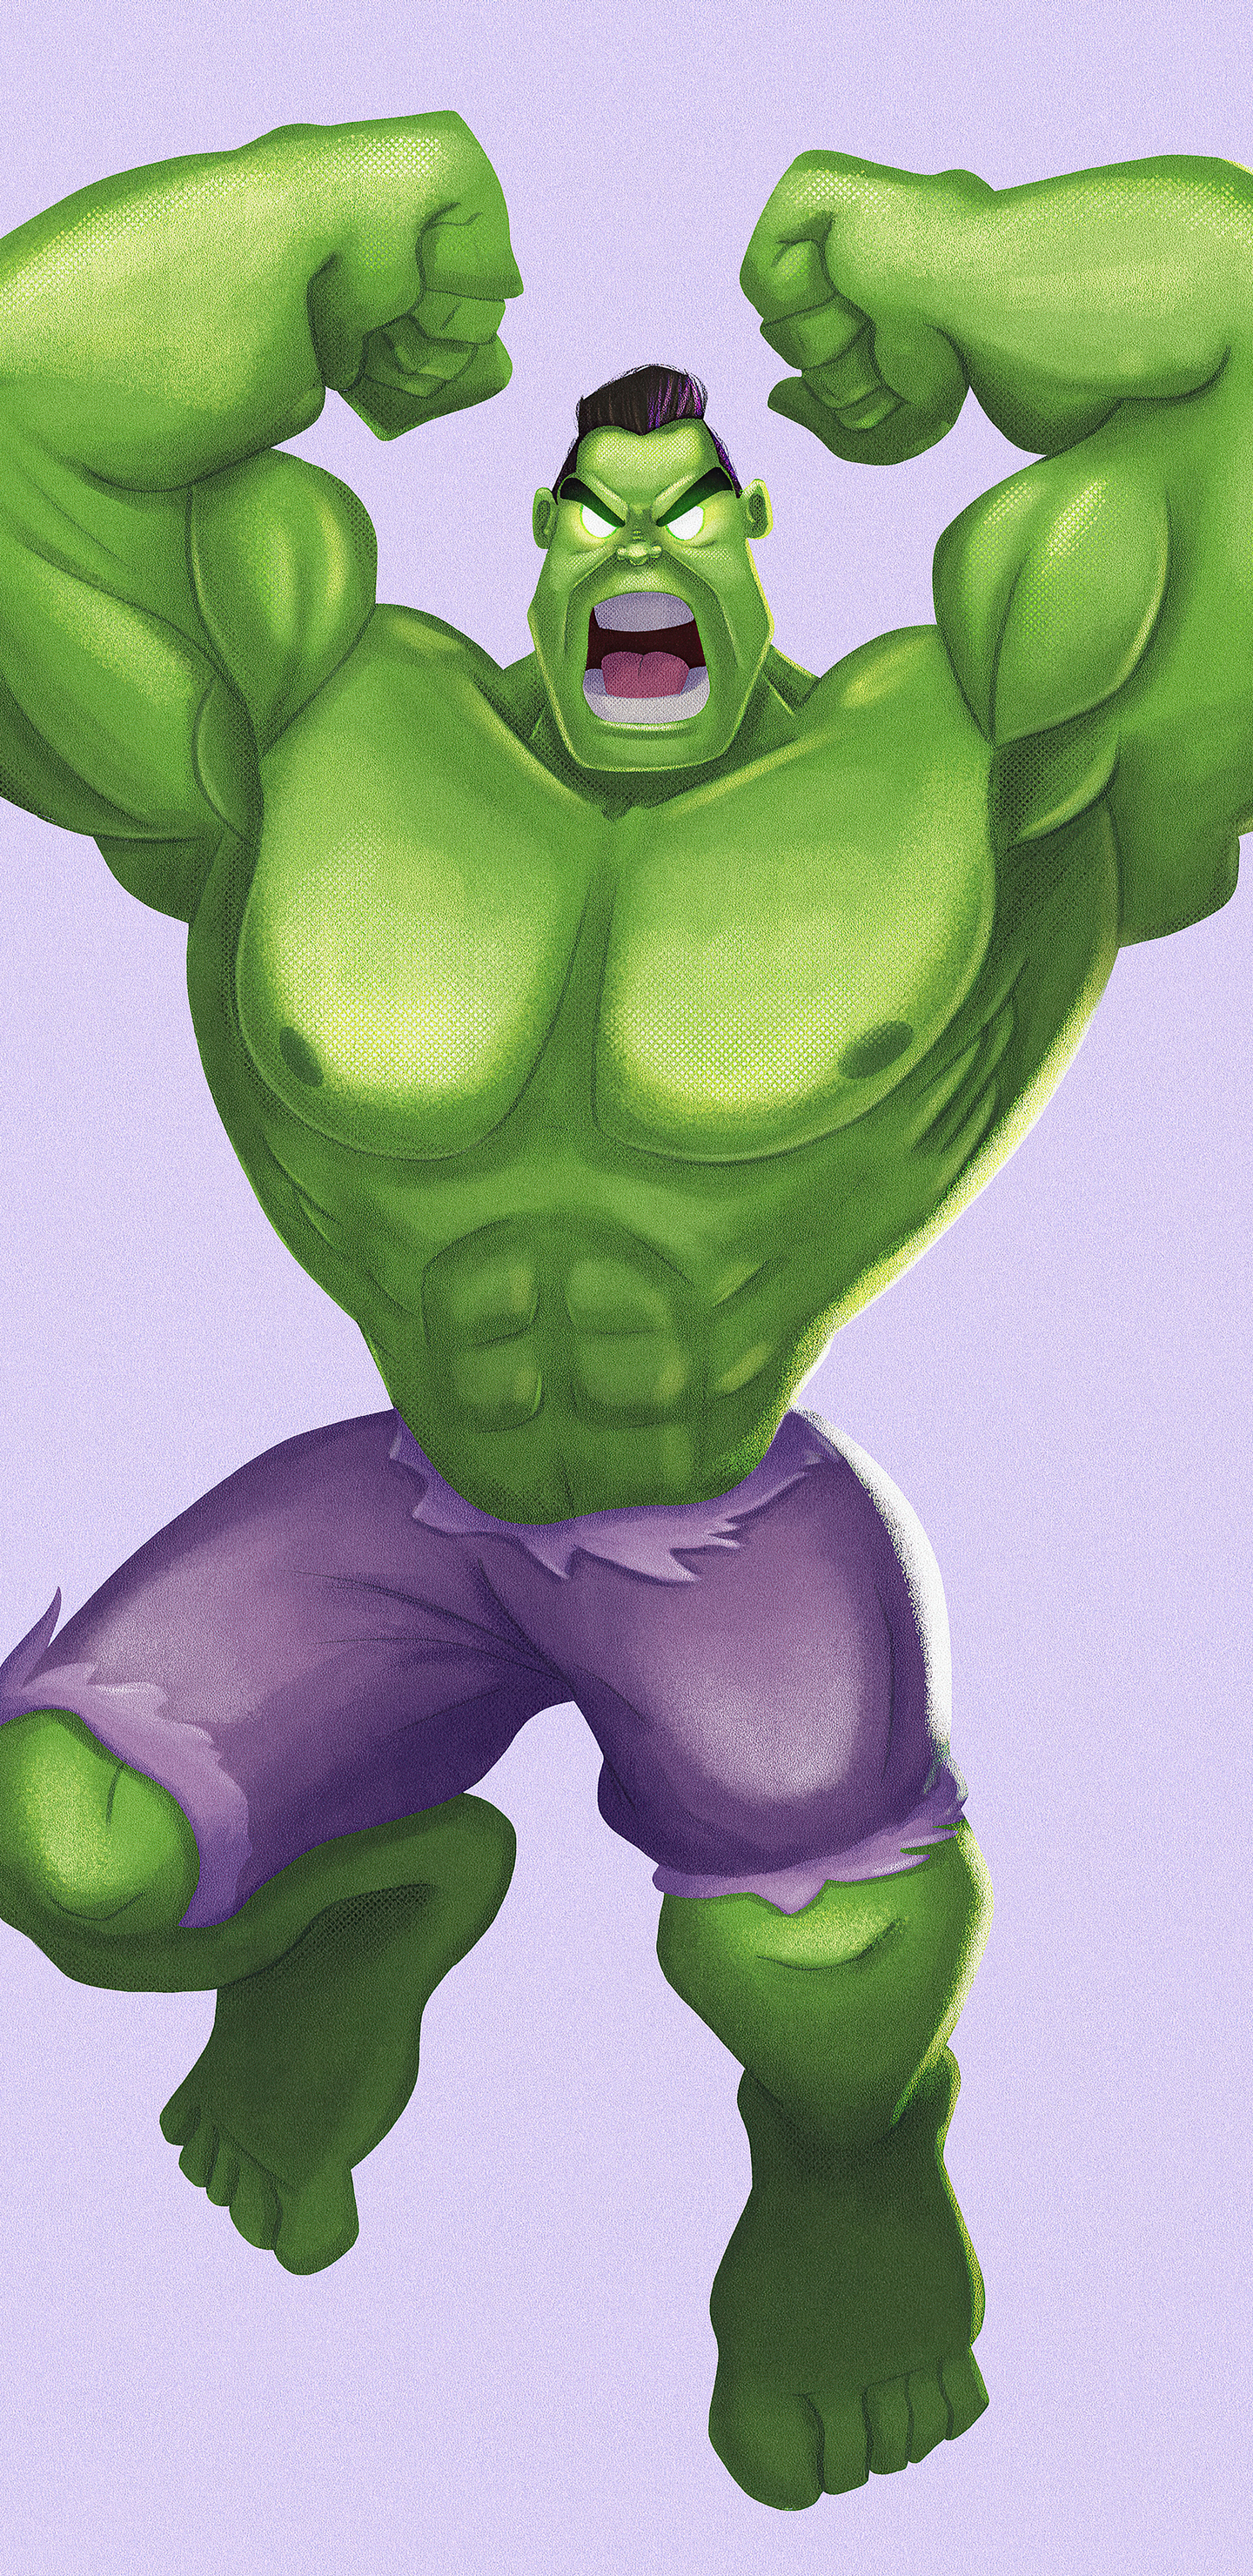 1440x2960 Hulk Smash 2020 4k Samsung Galaxy Note 9,8, S9,S8,S8+ QHD HD 4k  Wallpapers, Images, Backgrounds, Photos and Pictures